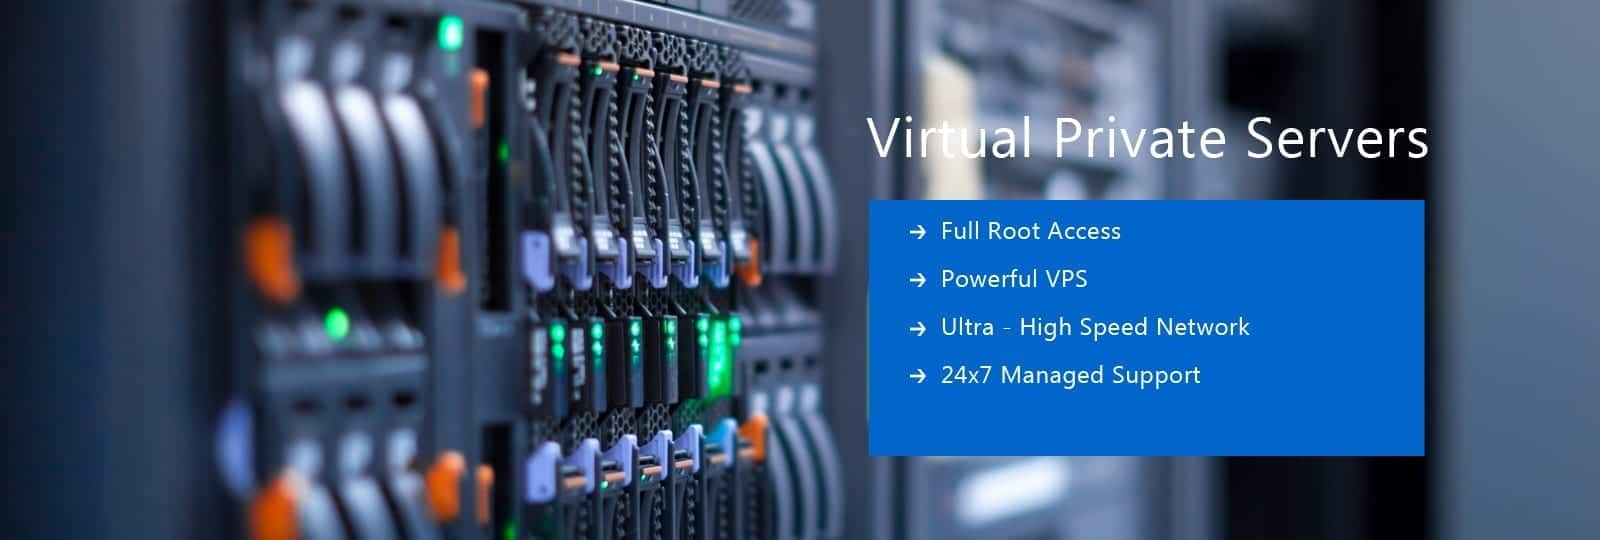 Cheap VPS Servers From $2.50 With 14-Day Money-Back Guarantee